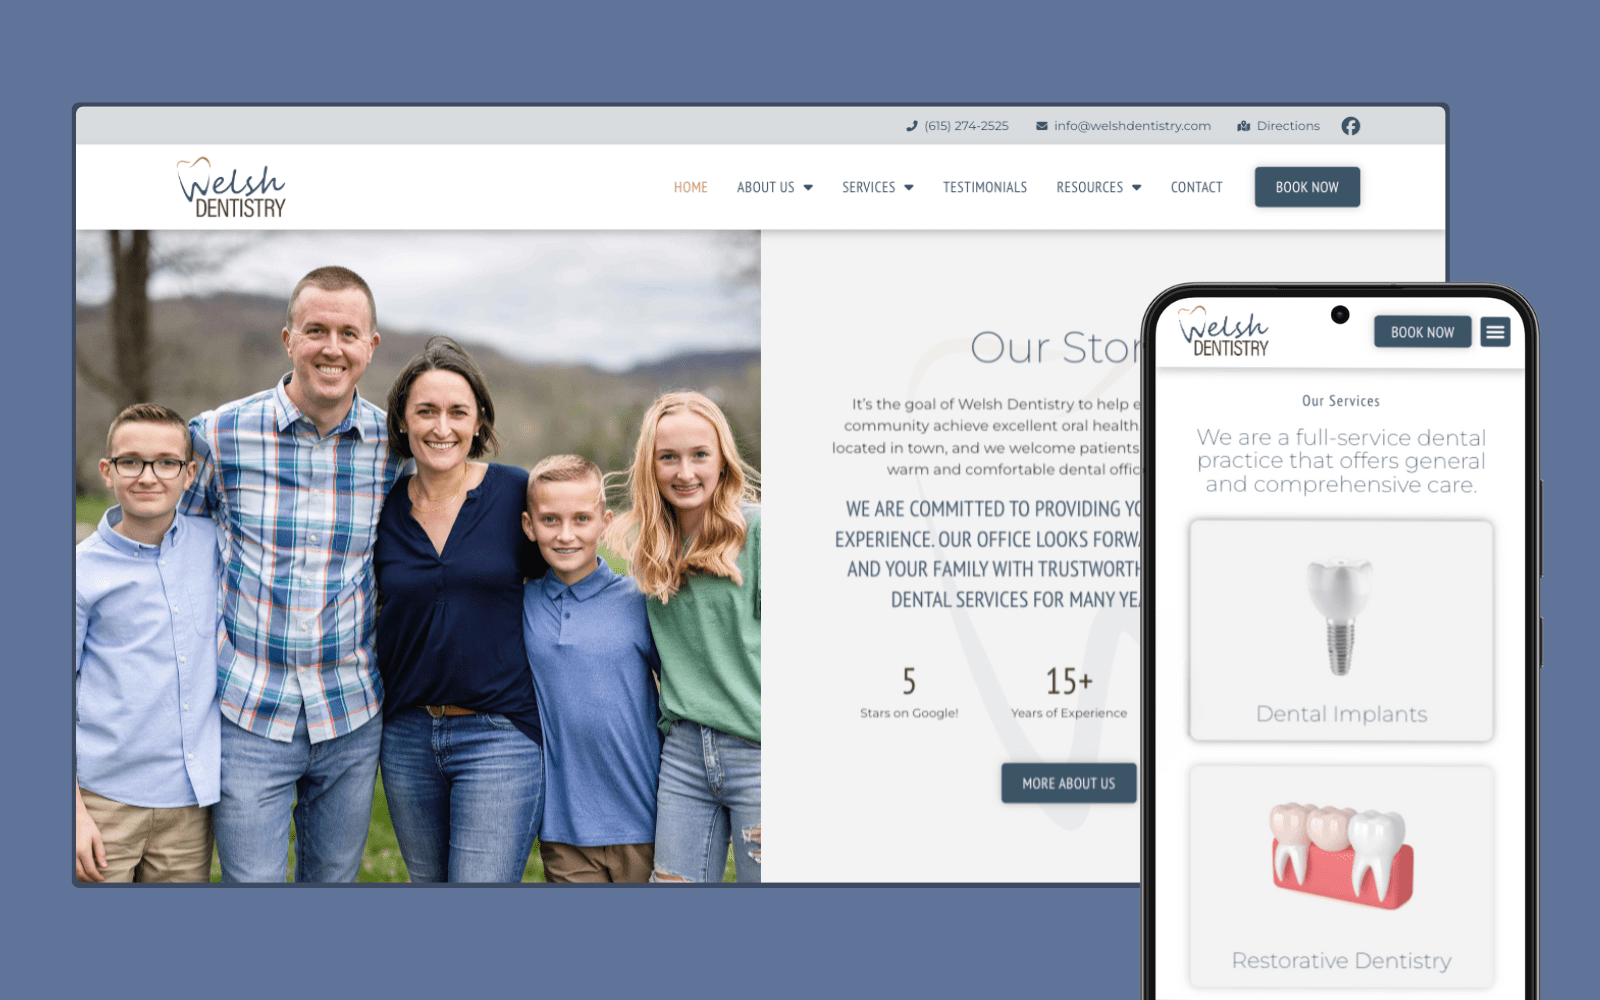 A modern dental website design featuring clean layout, professional images, and easy navigation for patients.